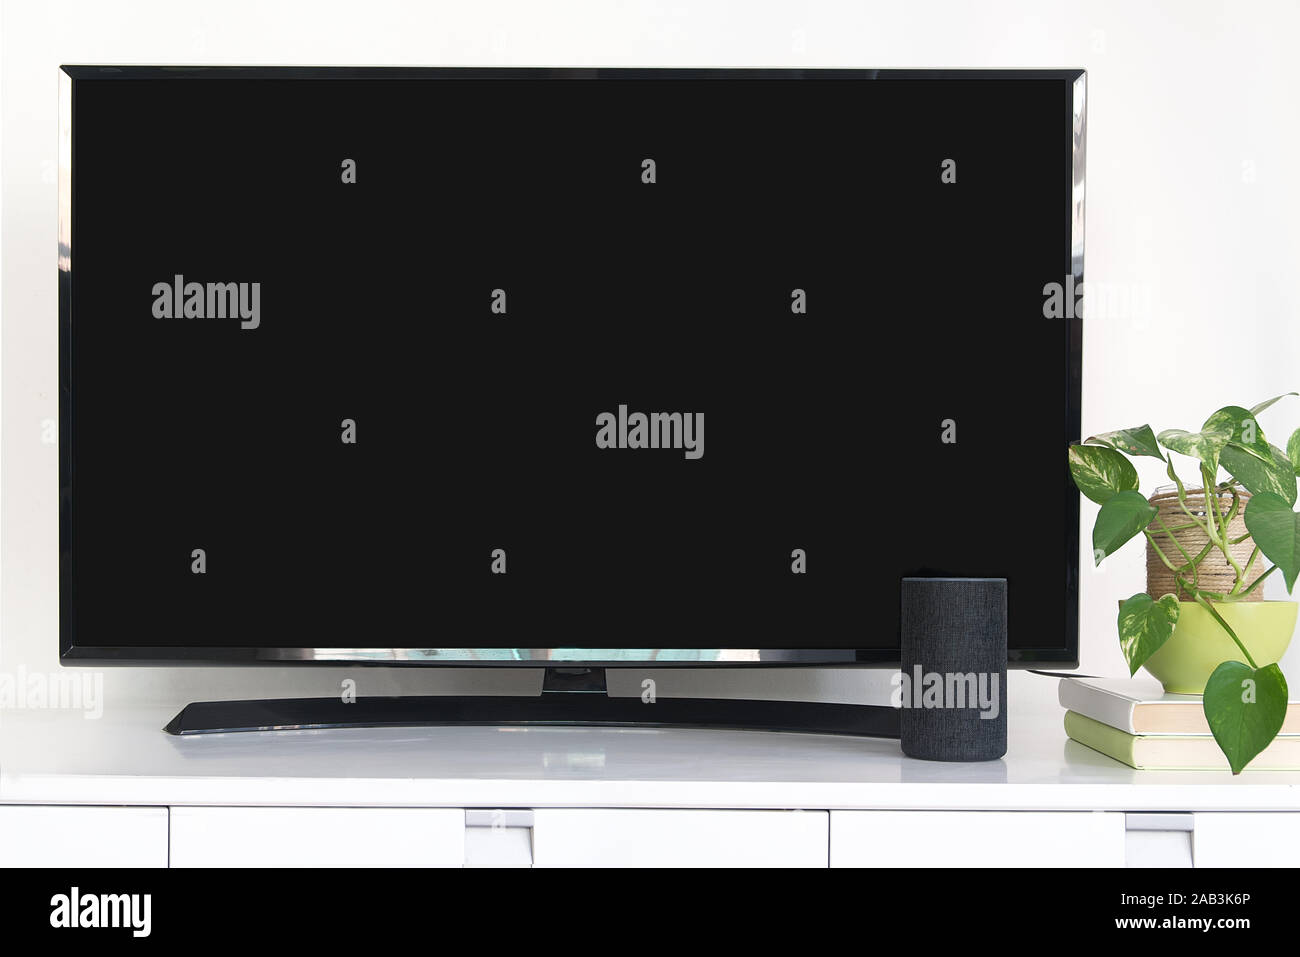 Alexa Echo Intelligent speaker device as home automation system to control a smart television. Living room with a black screen of a tv next to a plant. Stock Photo